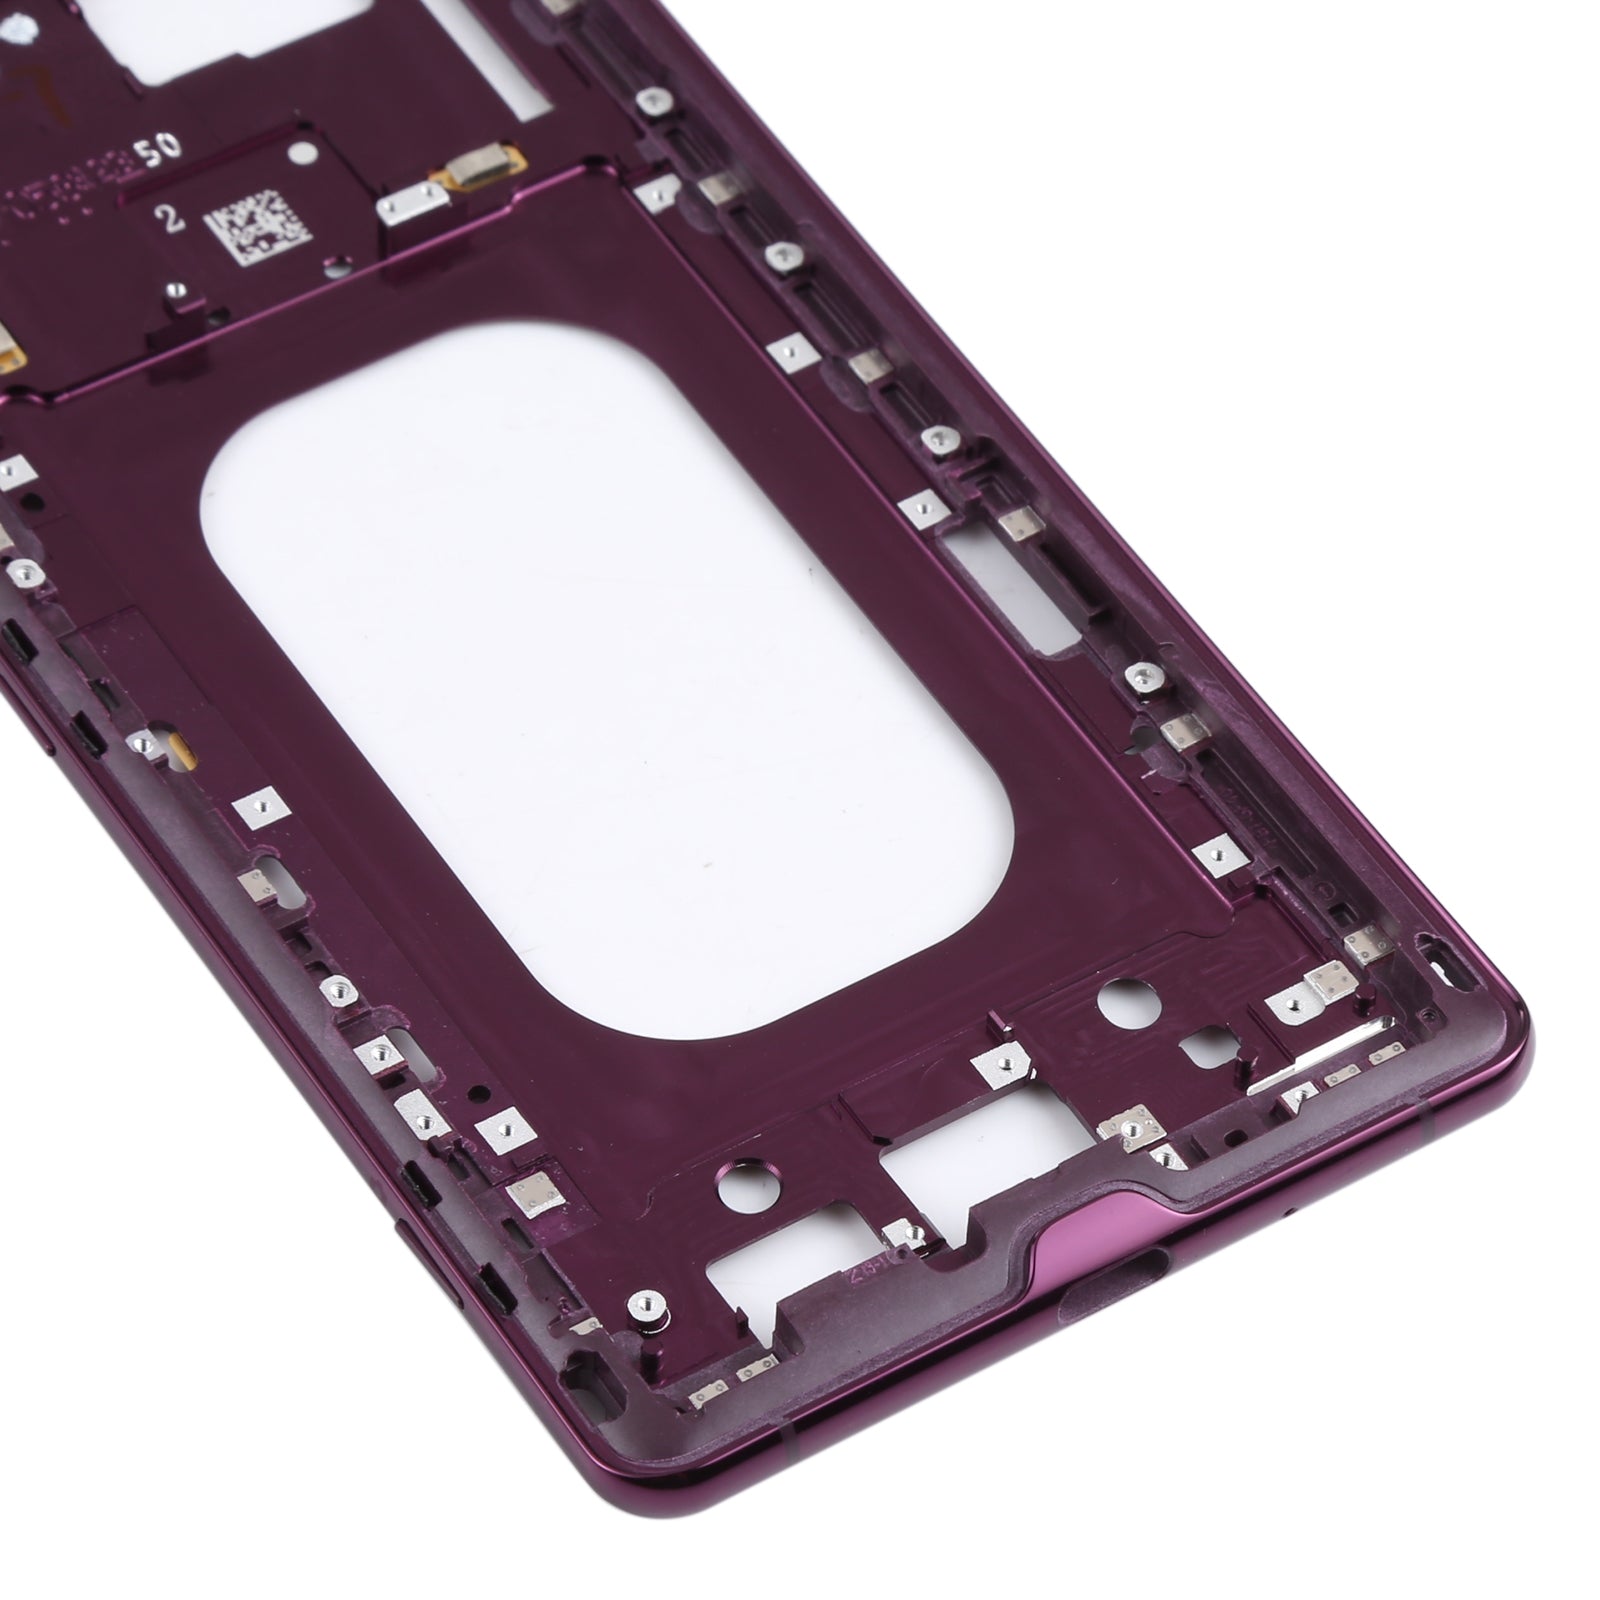 Chassis Back Housing Frame Sony Xperia XZ3 Purple